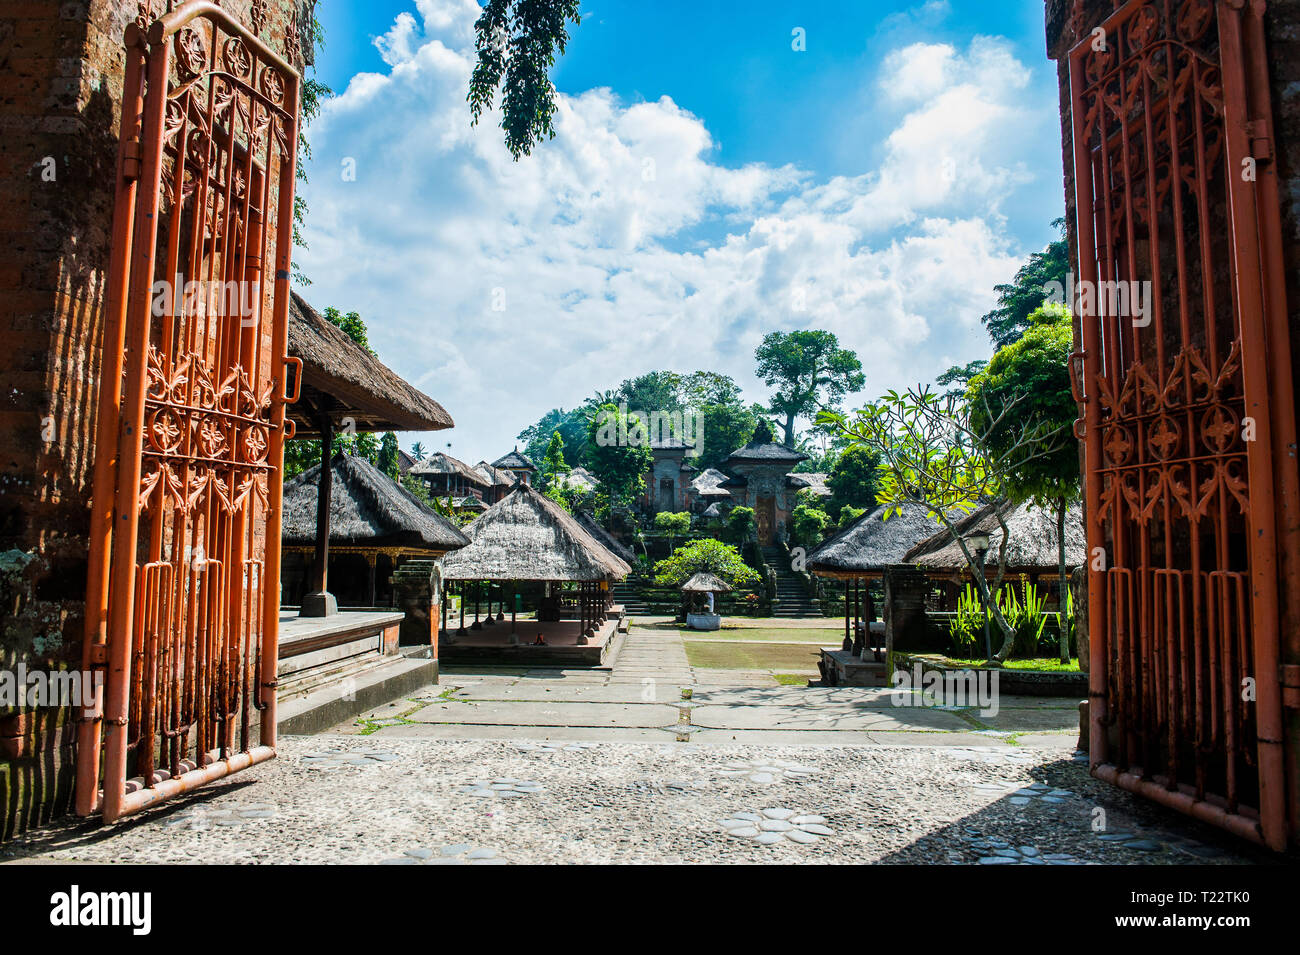 Indonesia, Bali, Yeh Pulu temple complex Stock Photo